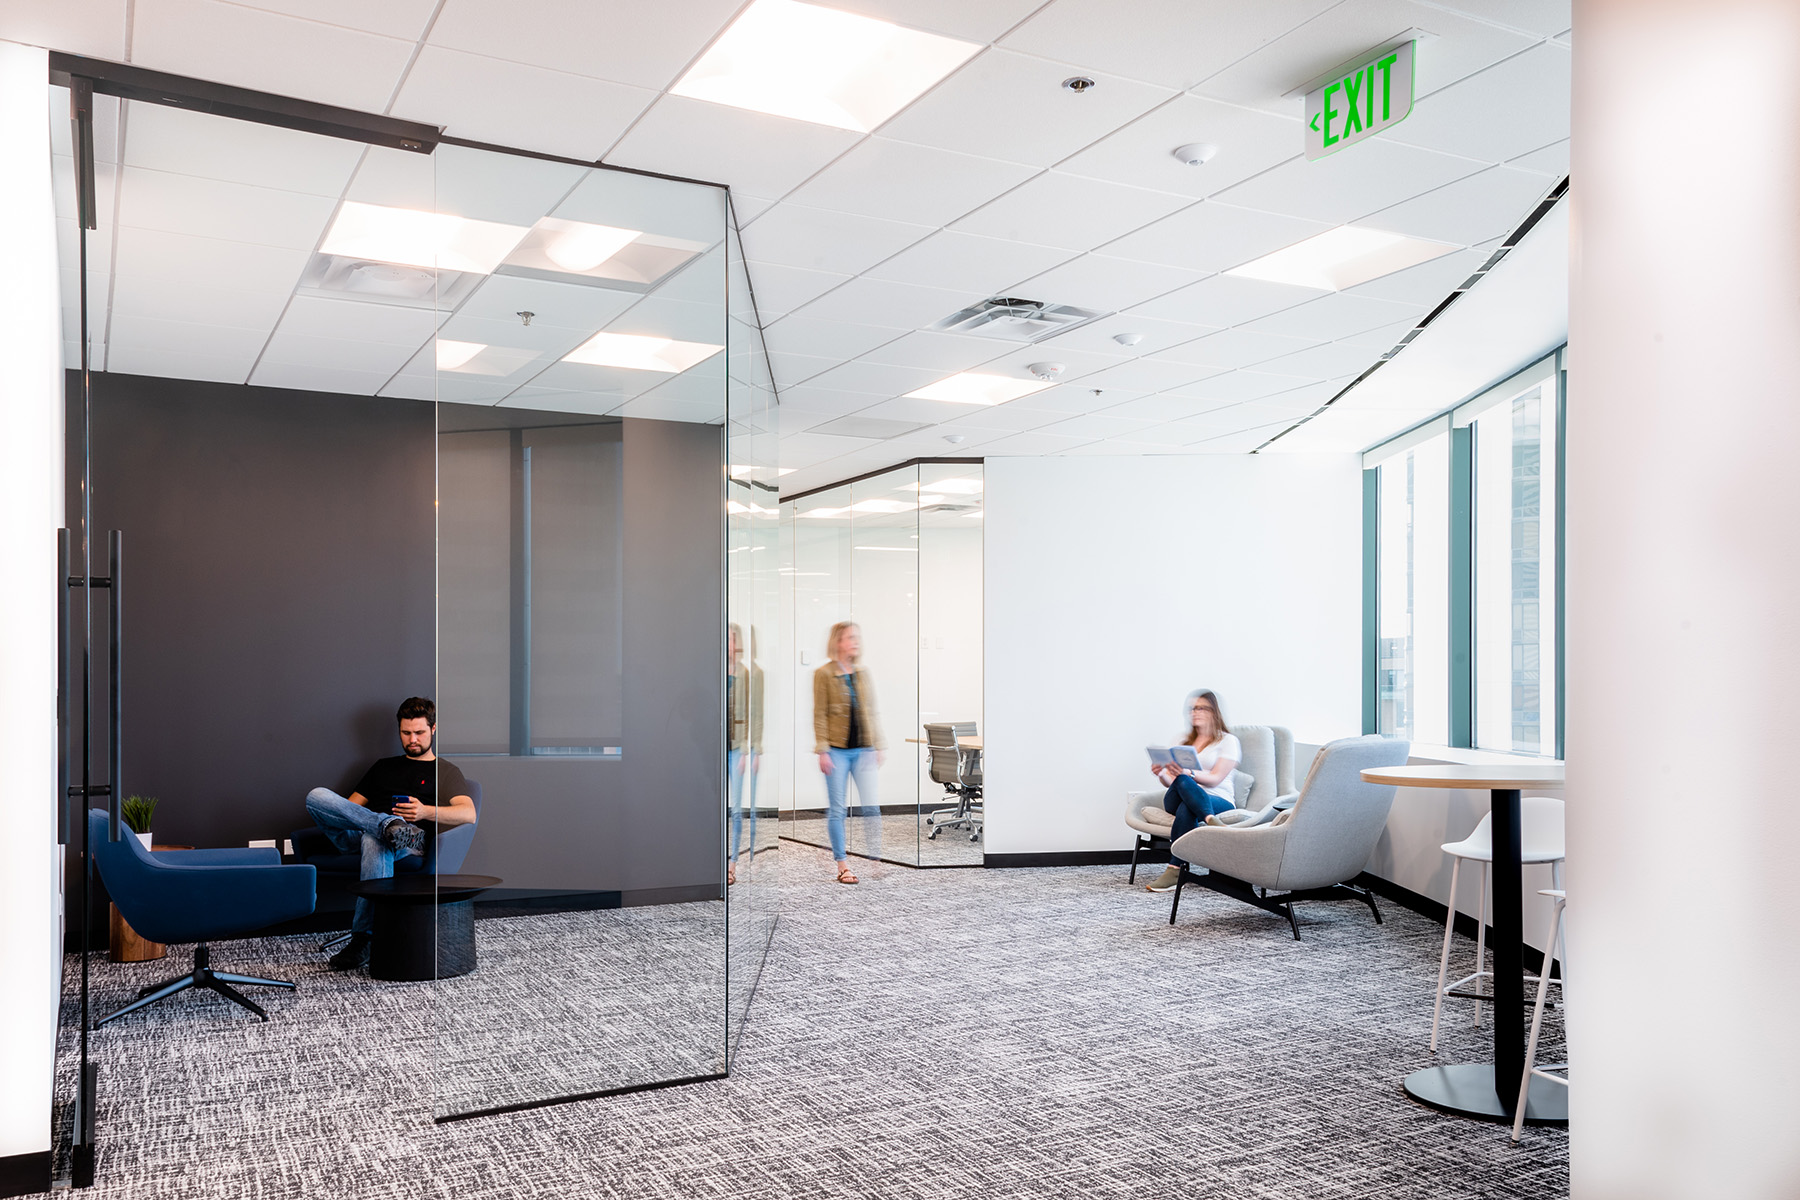 Square troffer ceiling light fixtures in offices and hallways at the Tabor Center provide ample light while balancing against the natural light that comes through the space’s large windows.